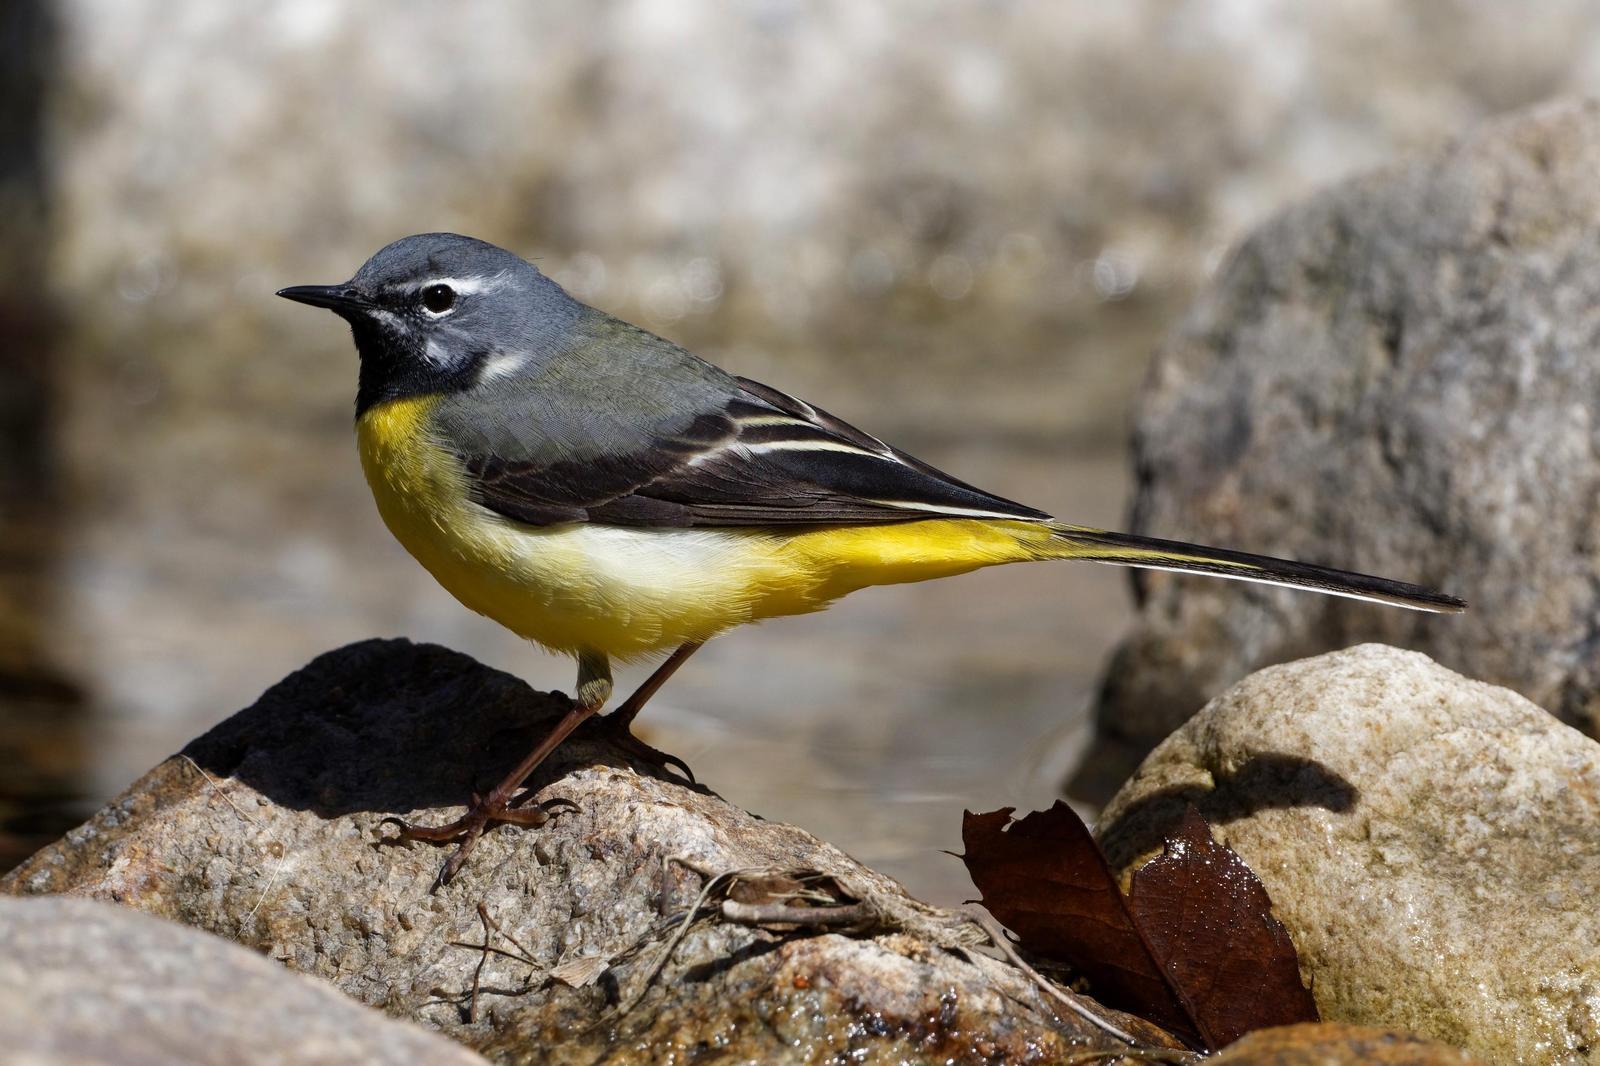 Gray Wagtail Photo by Robert Cousins